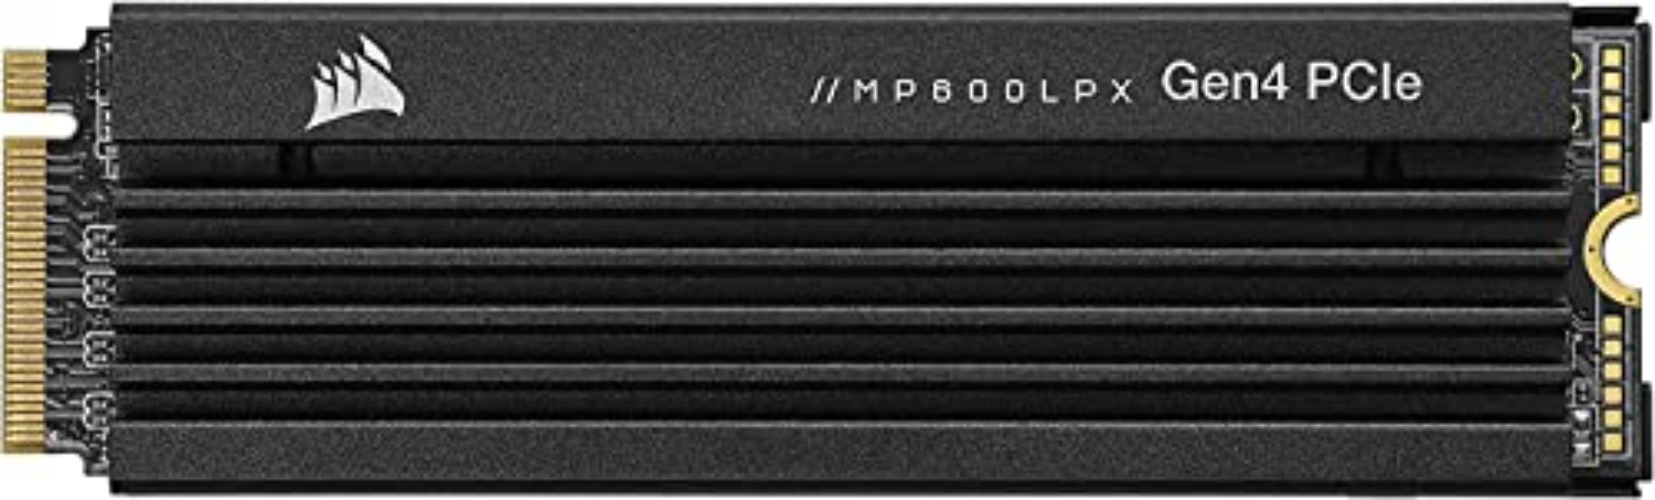 Corsair MP600 PRO LPX 2TB M.2 NVMe PCIe x4 Gen4 SSD - Optimized for PS5 (Up to 7,100MB/sec Sequential Read & 6,800MB/sec Sequential Write Speeds, High-Speed Interface, Compact Form Factor) Black - 2TB - Black